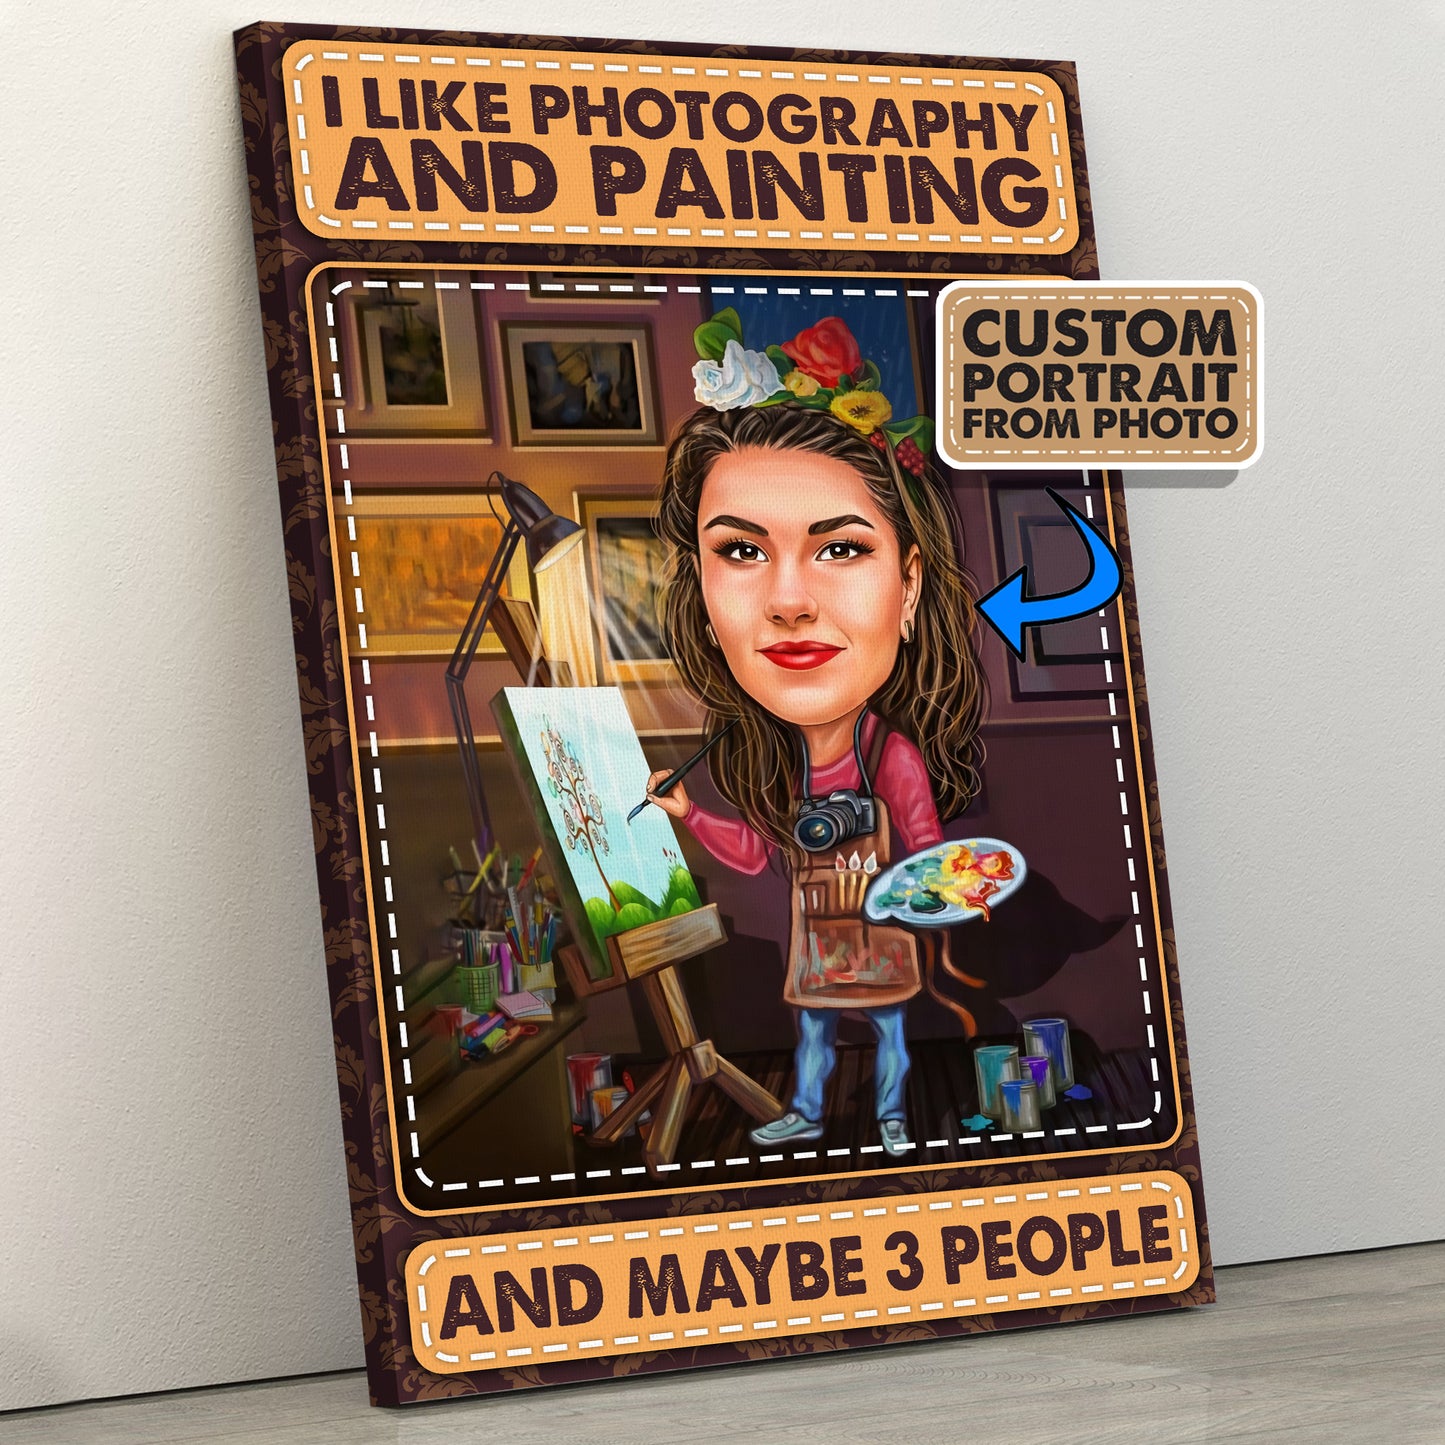 I Like Photography And Painting And Maybe 3 People Poster Canvas - Custom Caricature Portrait From Your Photo